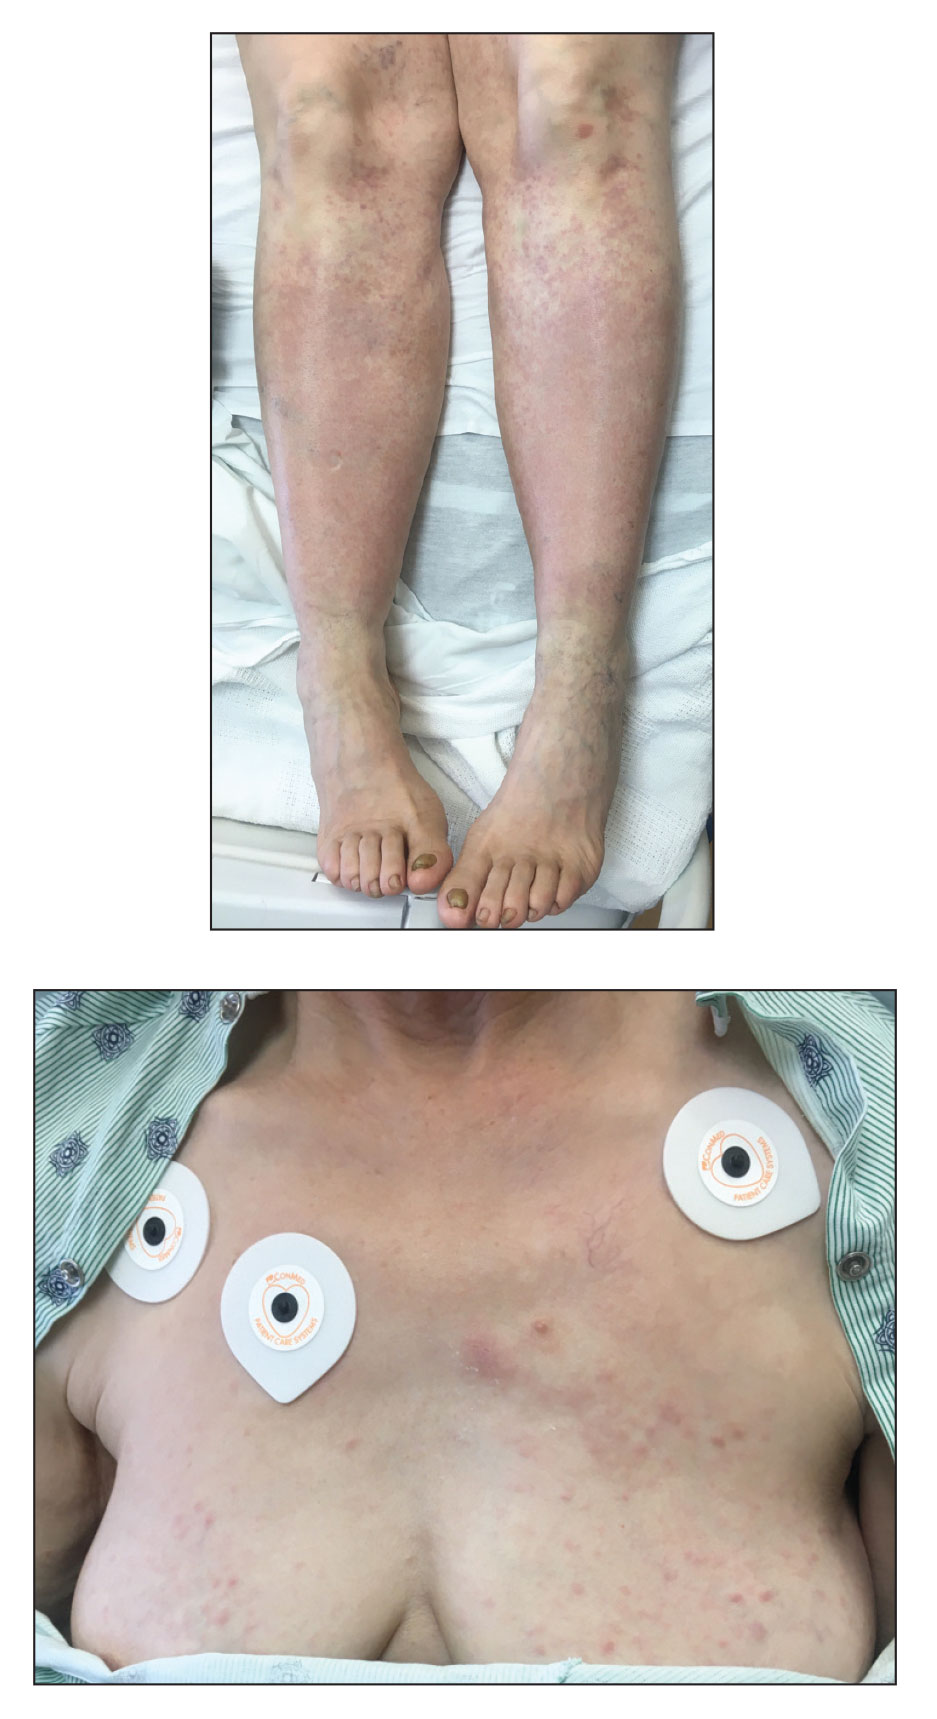 Nonblanching rash on the legs and chest